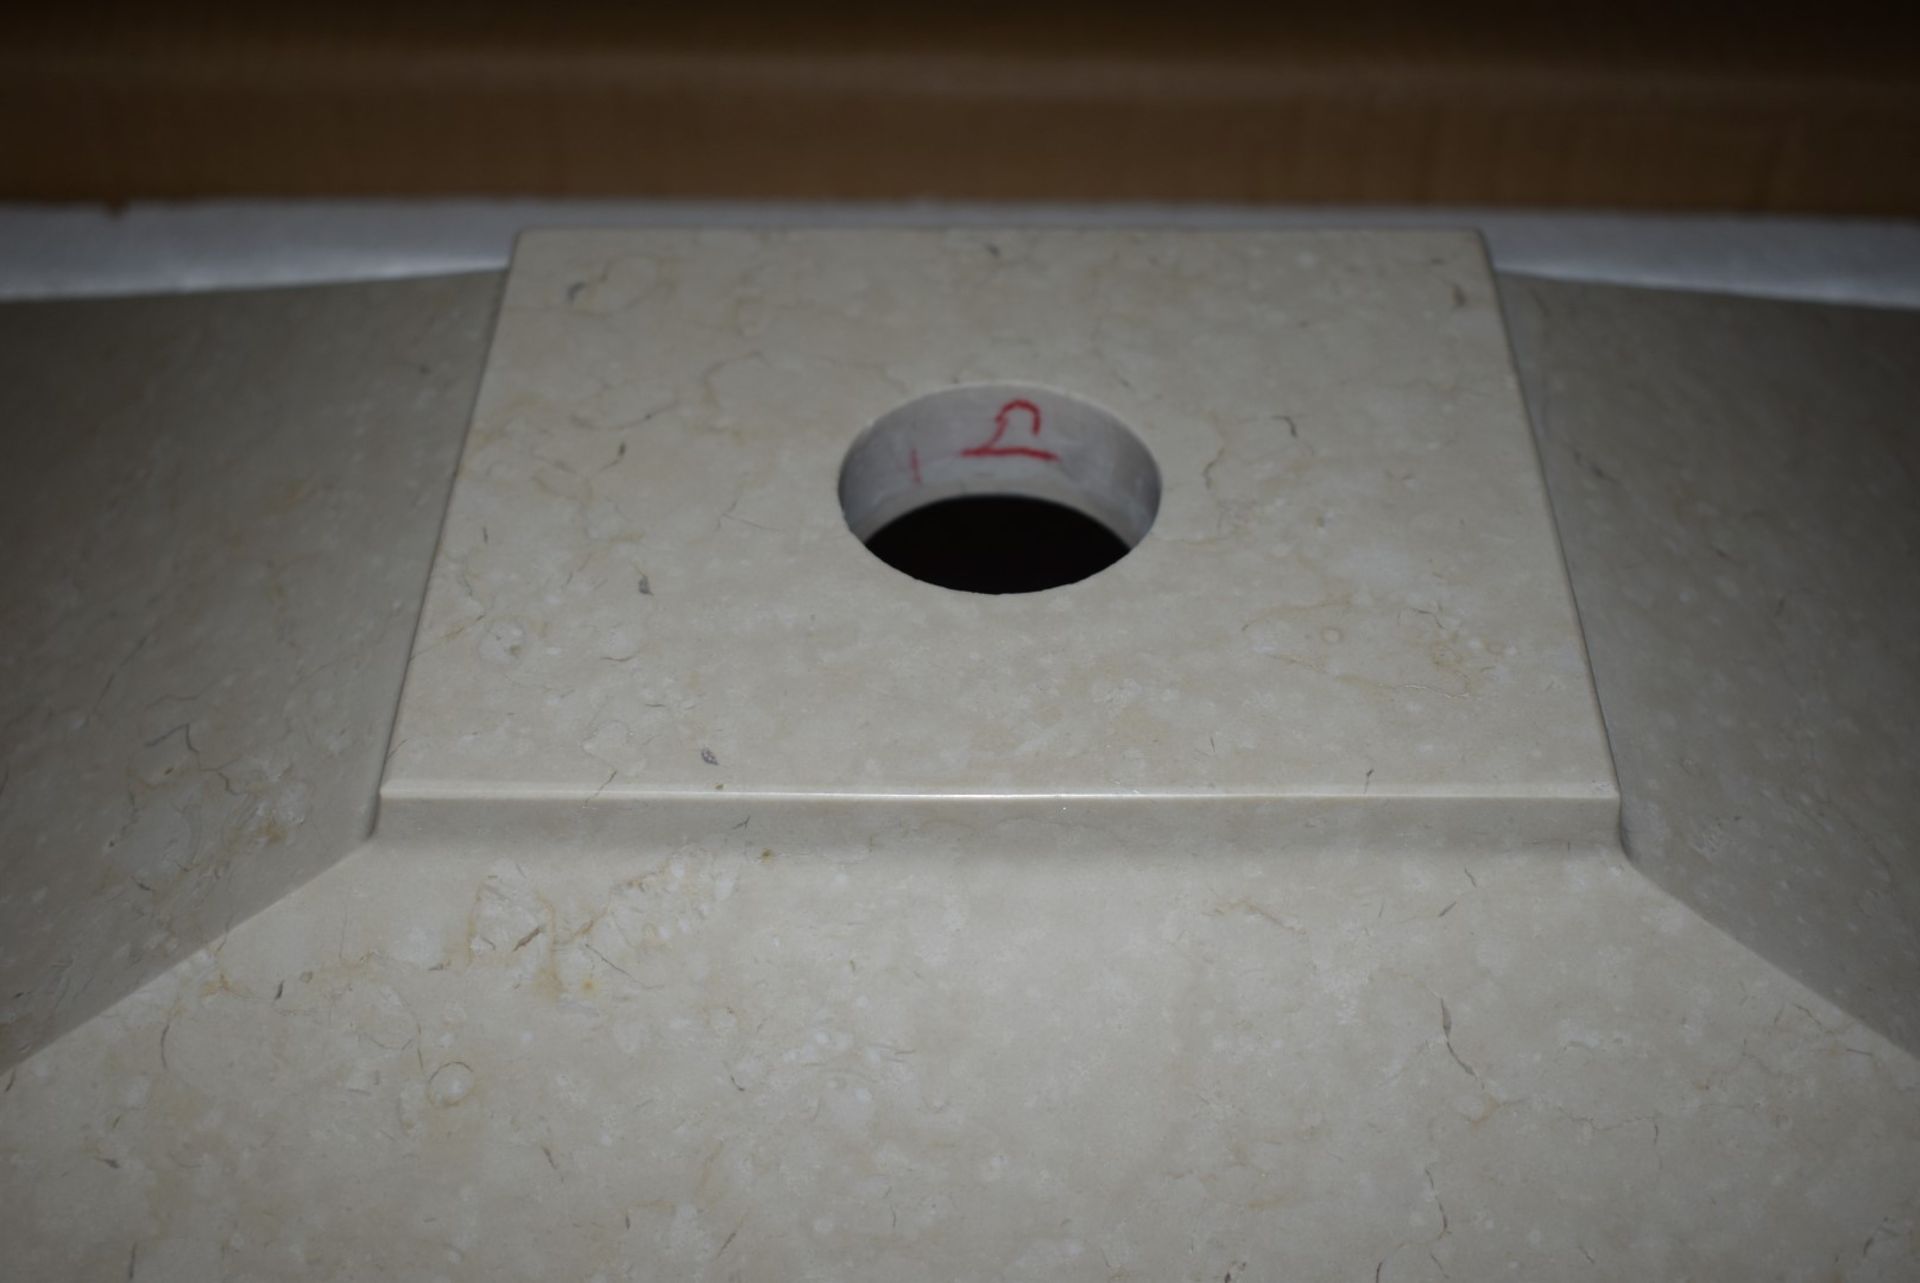 1 x Stonearth 'Karo' Solid Galala Marble Stone Countertop Sink Basin - New Boxed Stock - RRP £ - Image 8 of 8